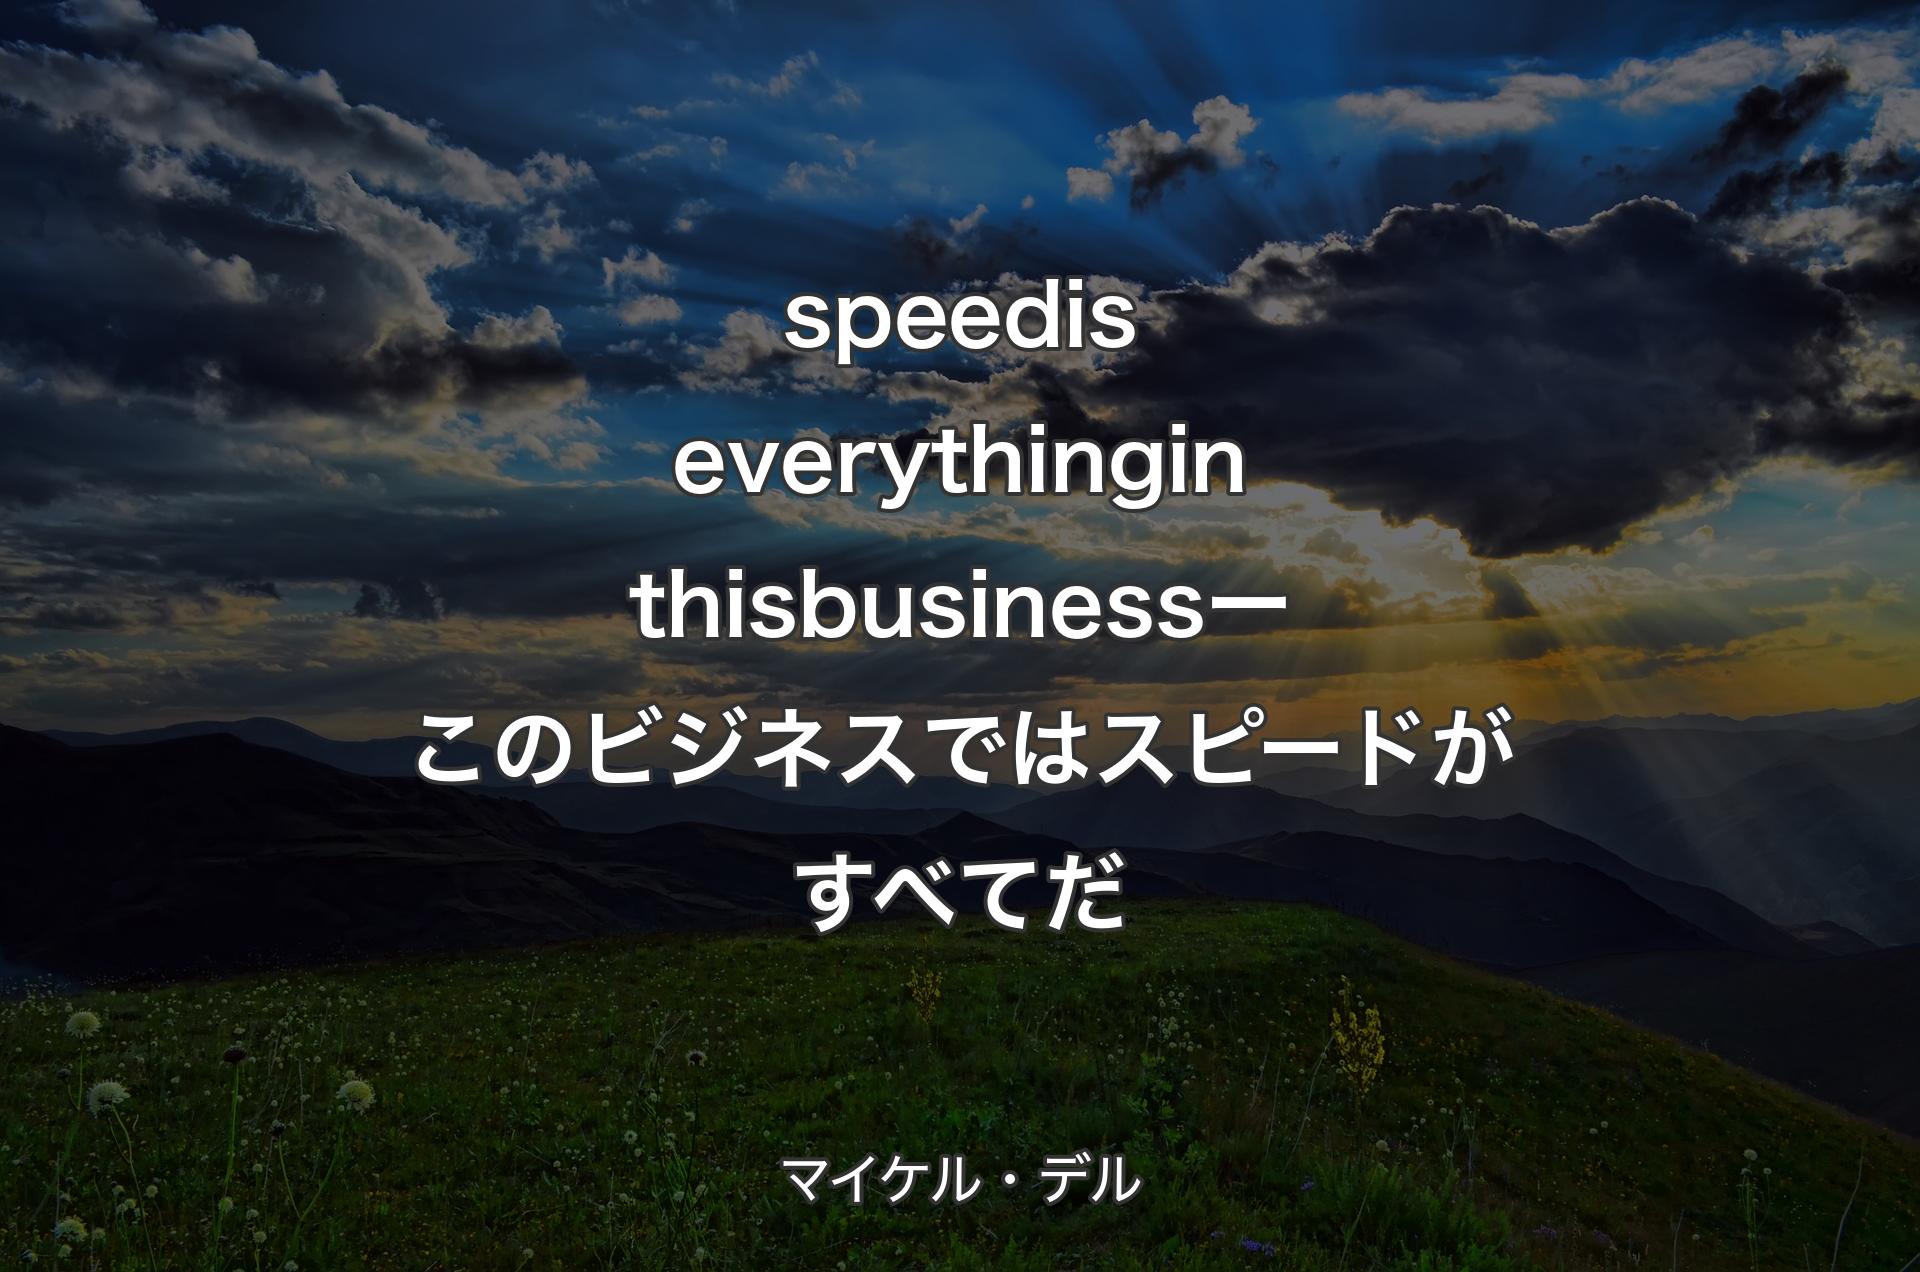 speed is everything in this business ー このビジネスではスピードがすべてだ - マイケル・デル